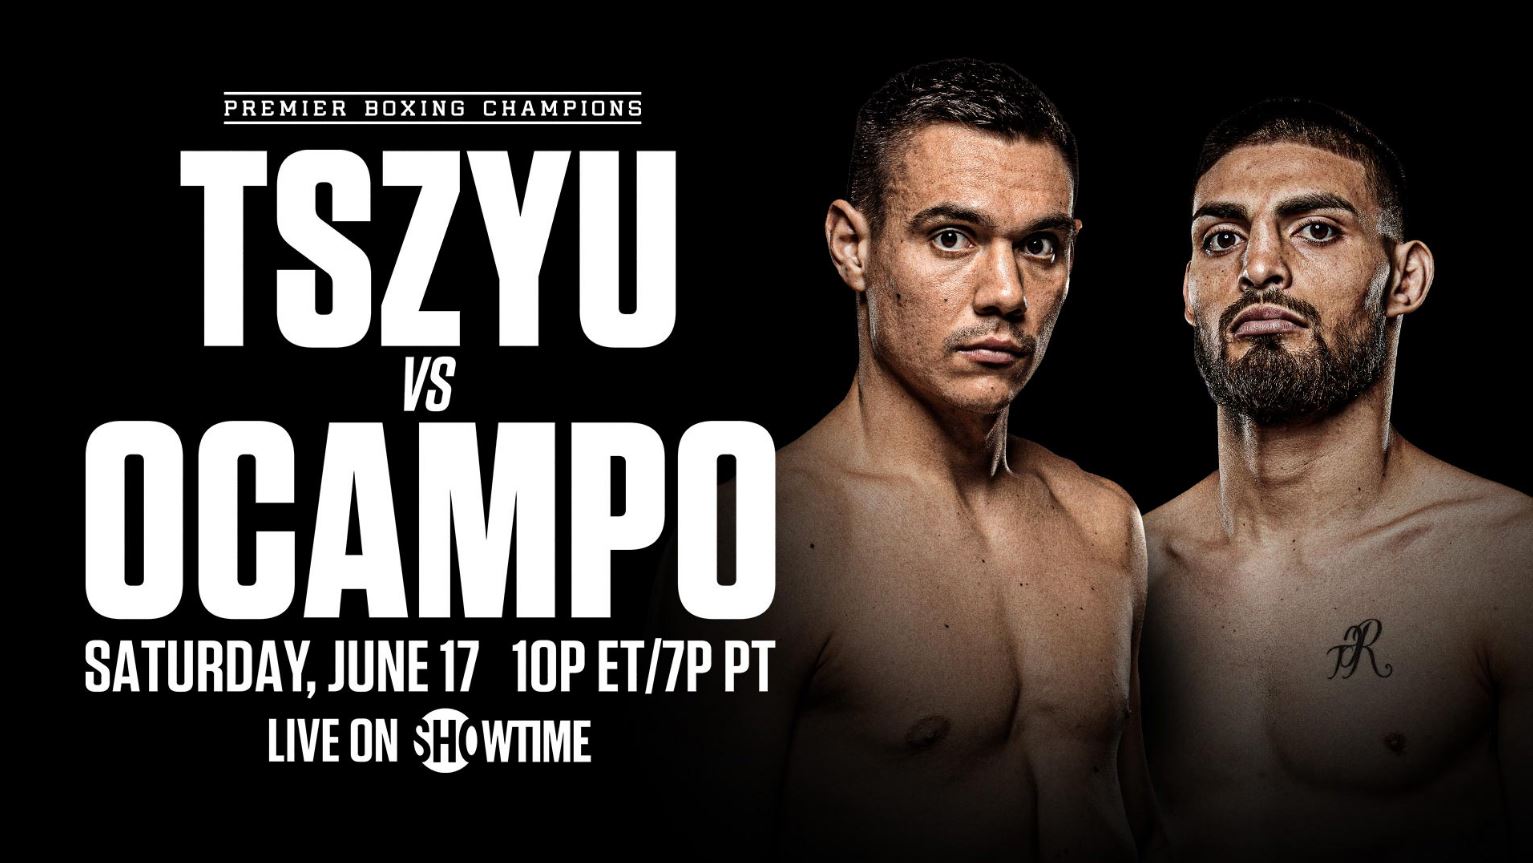 vs Ocampo live stream: How to watch the boxing match | Digital Trends